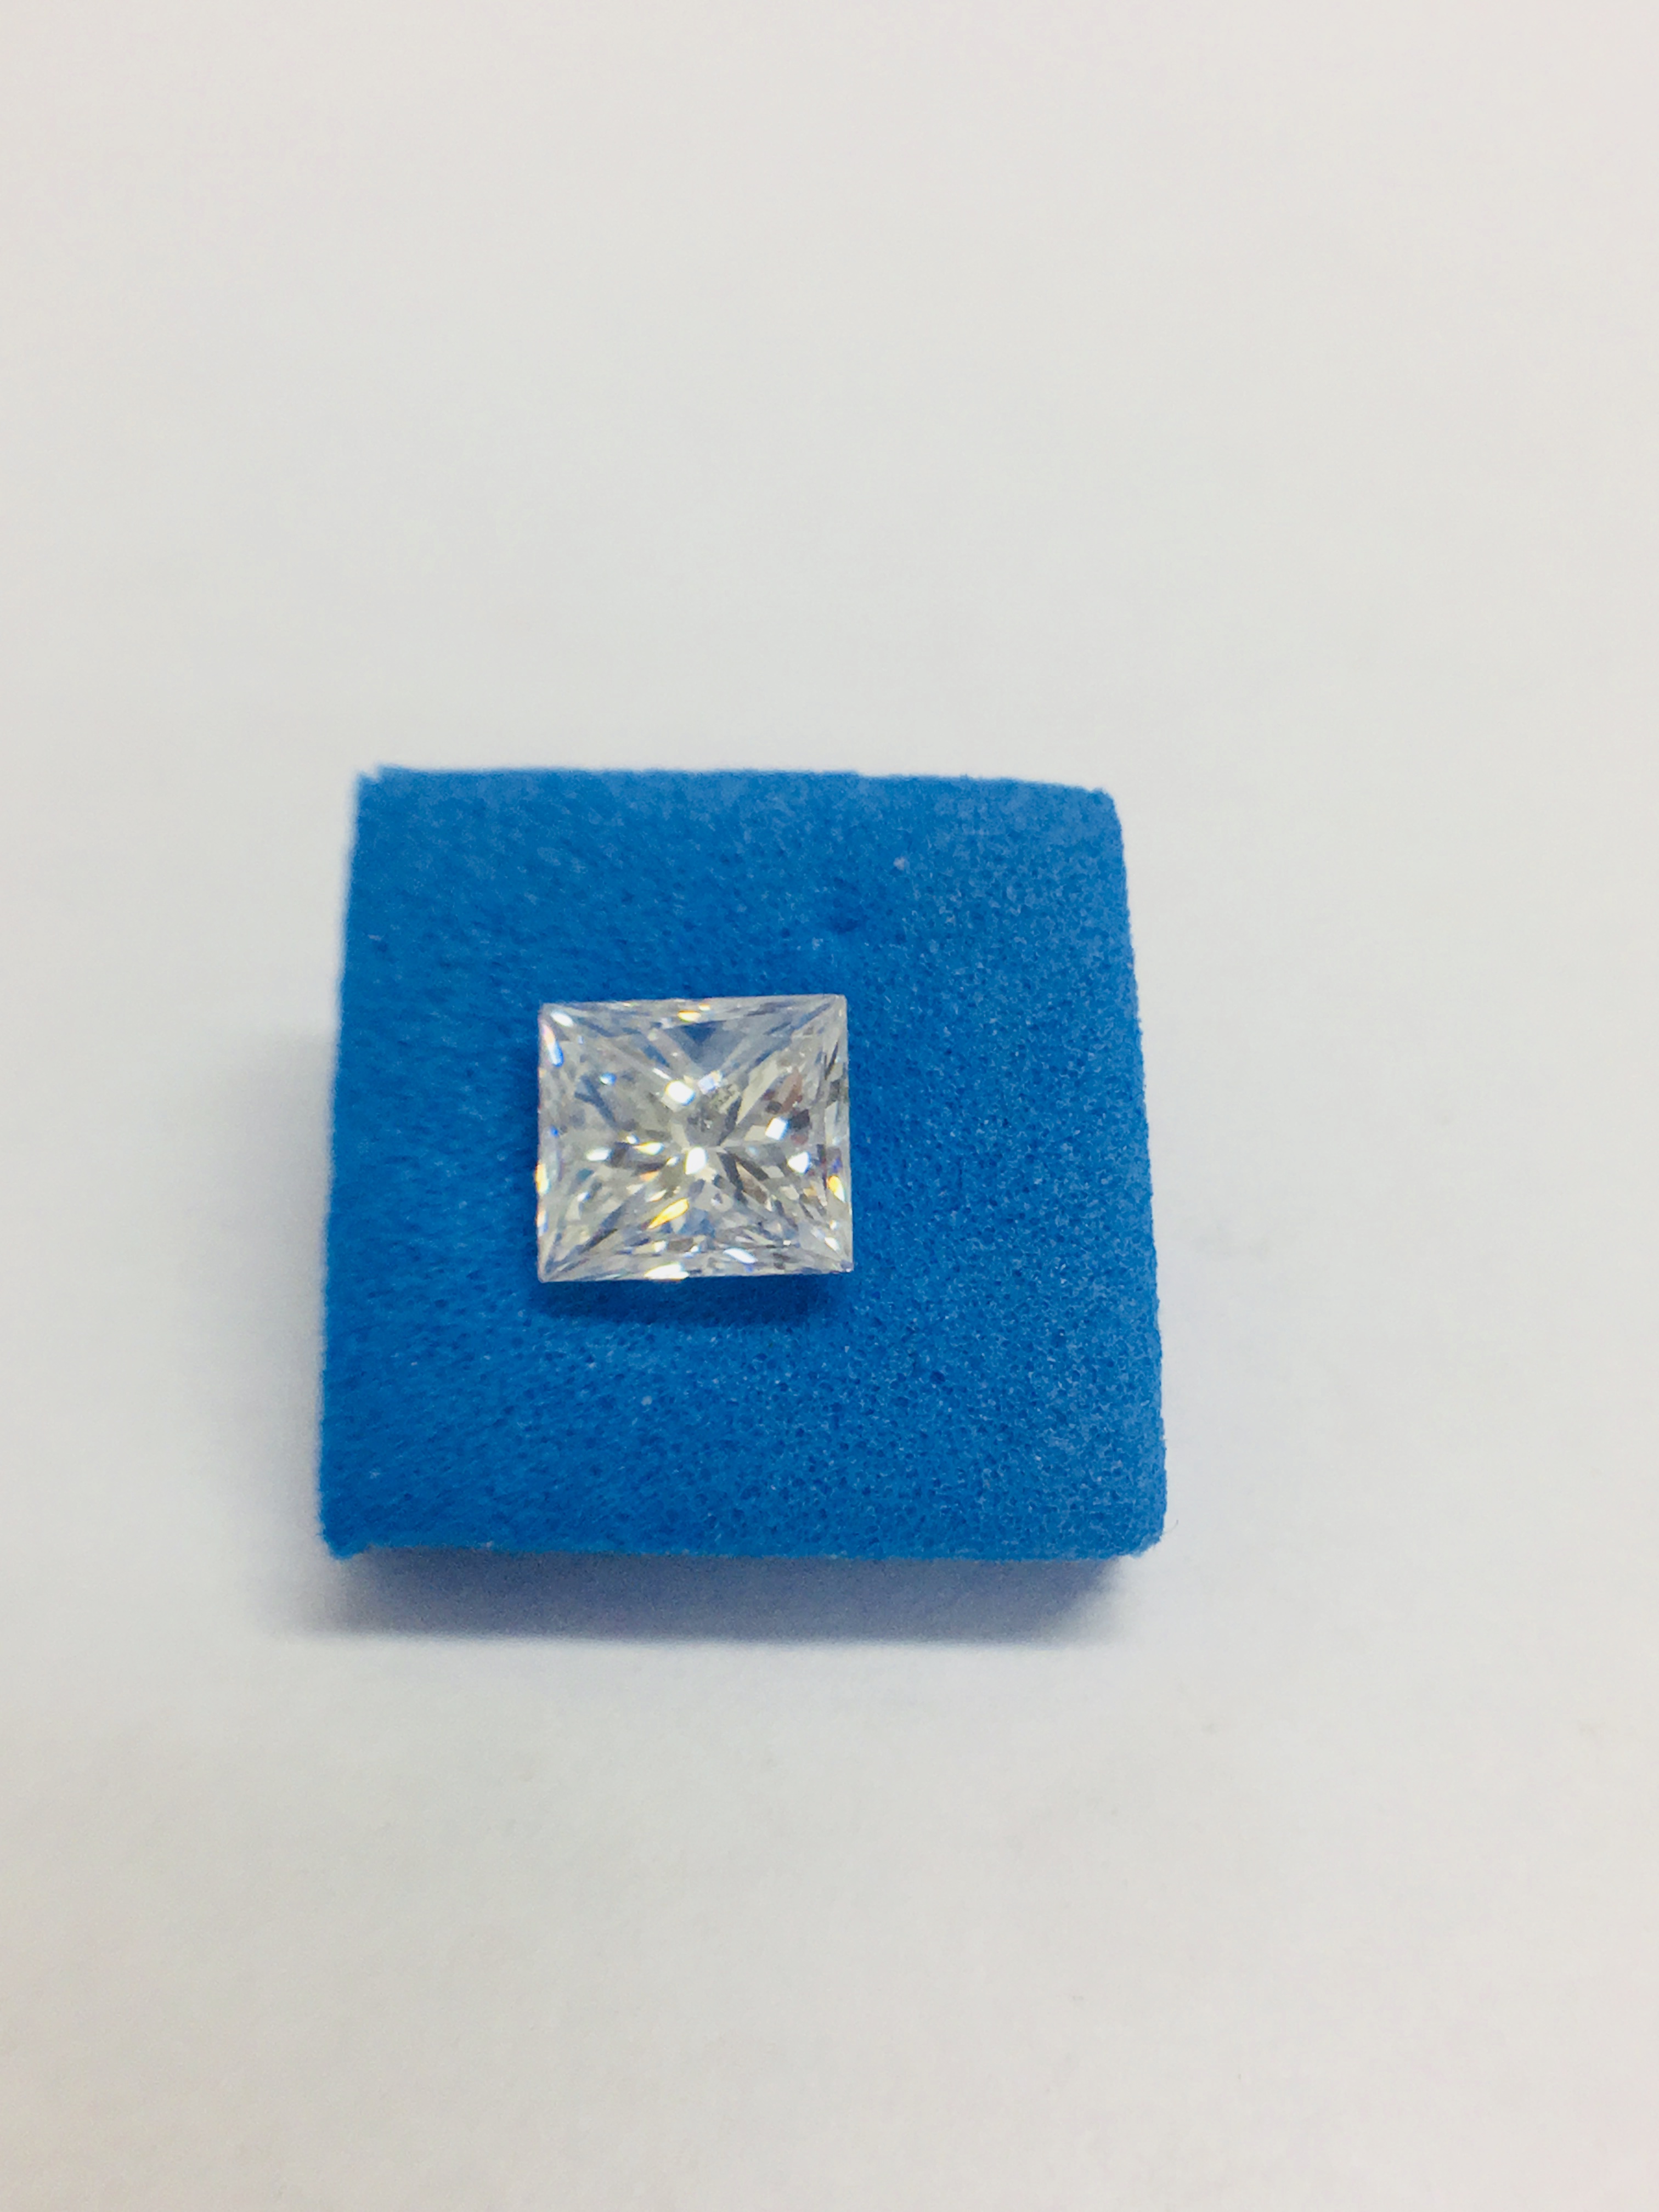 1.04ct Princess cut natural diamond,H Coloured,si2 clarity,excellent cut,clarity enhanced - Image 2 of 2